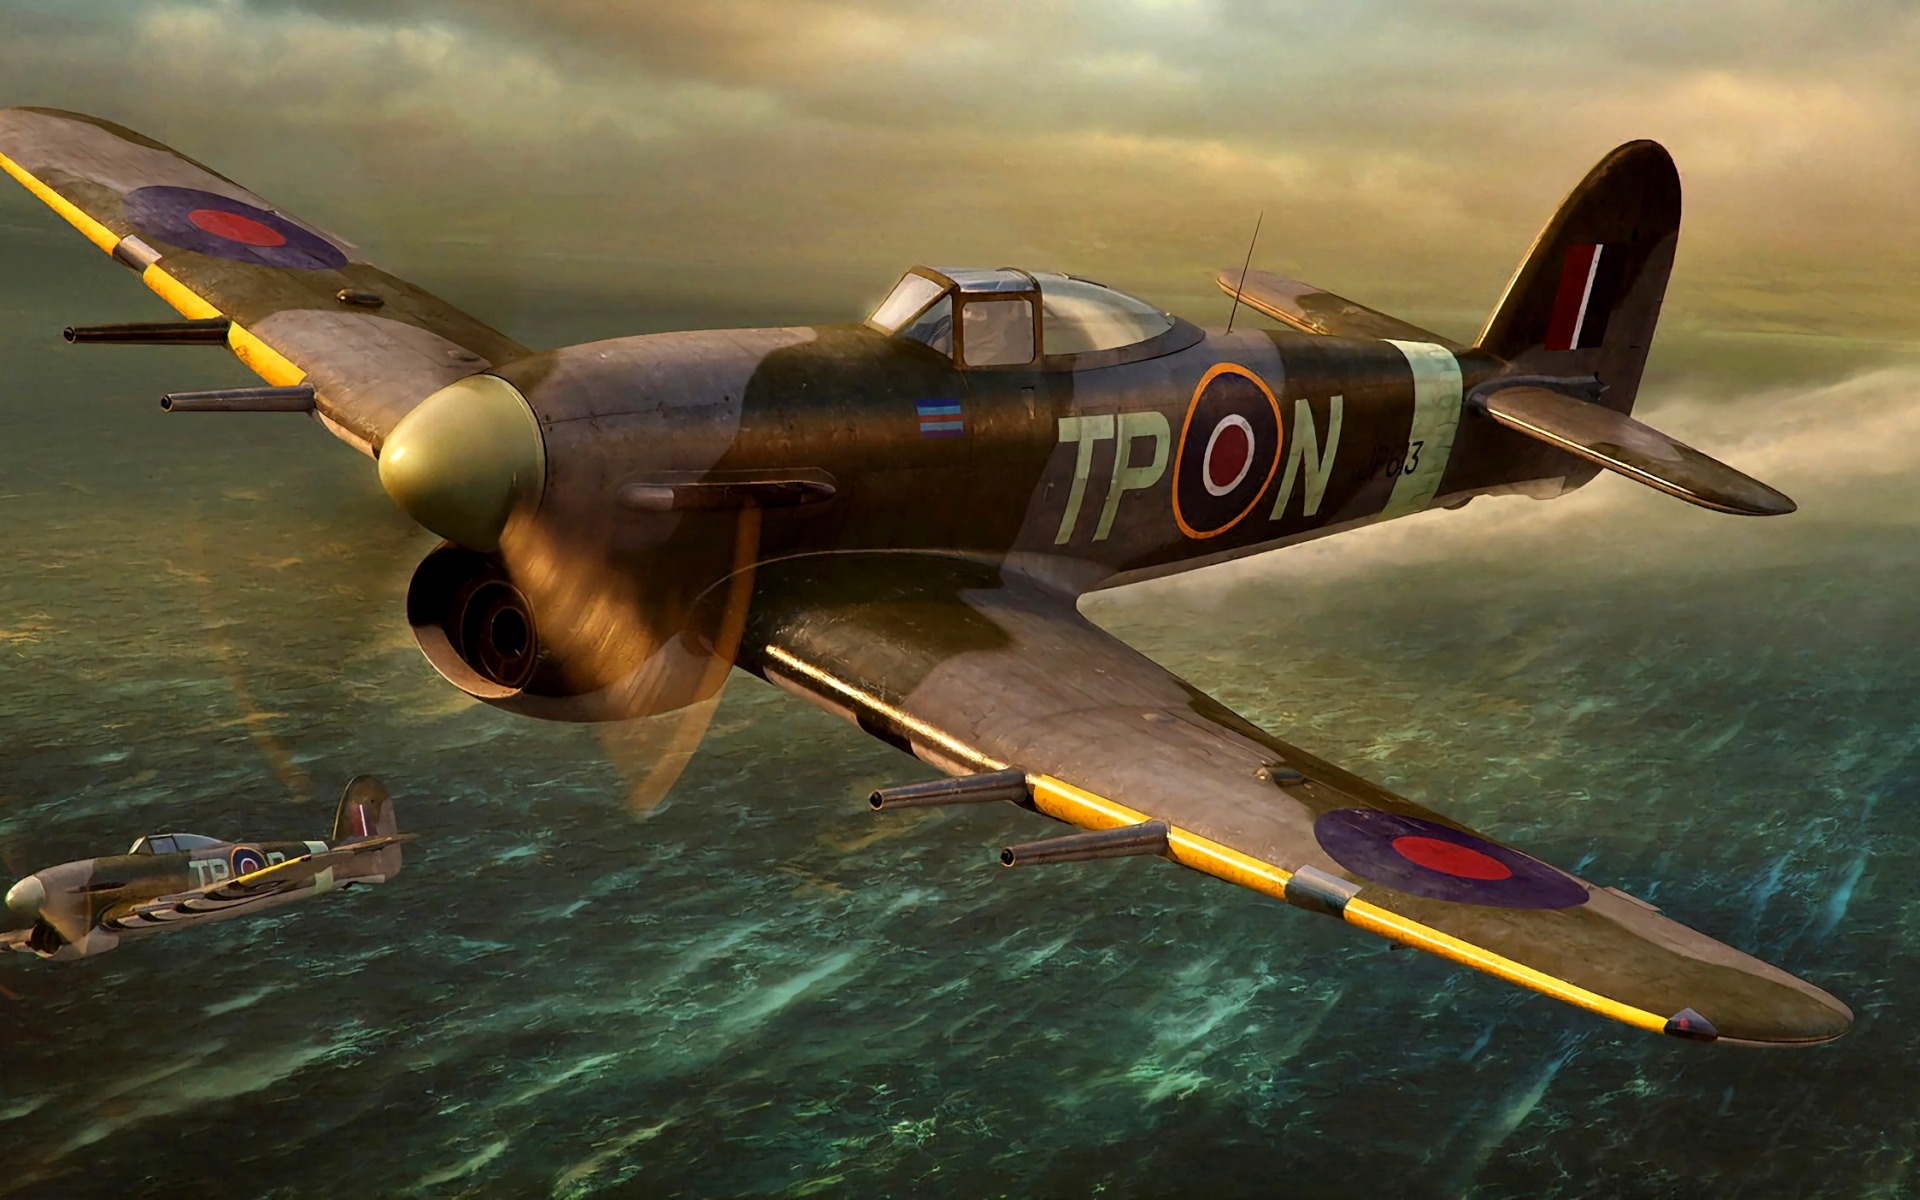 Download Wallpaper Hawker Typhoon, Royal Air Force, British Fighter, Art, World Of Warplanes, Fighter Bomber, WWII For Desktop With Resolution 1920x1200. High Quality HD Picture Wallpaper